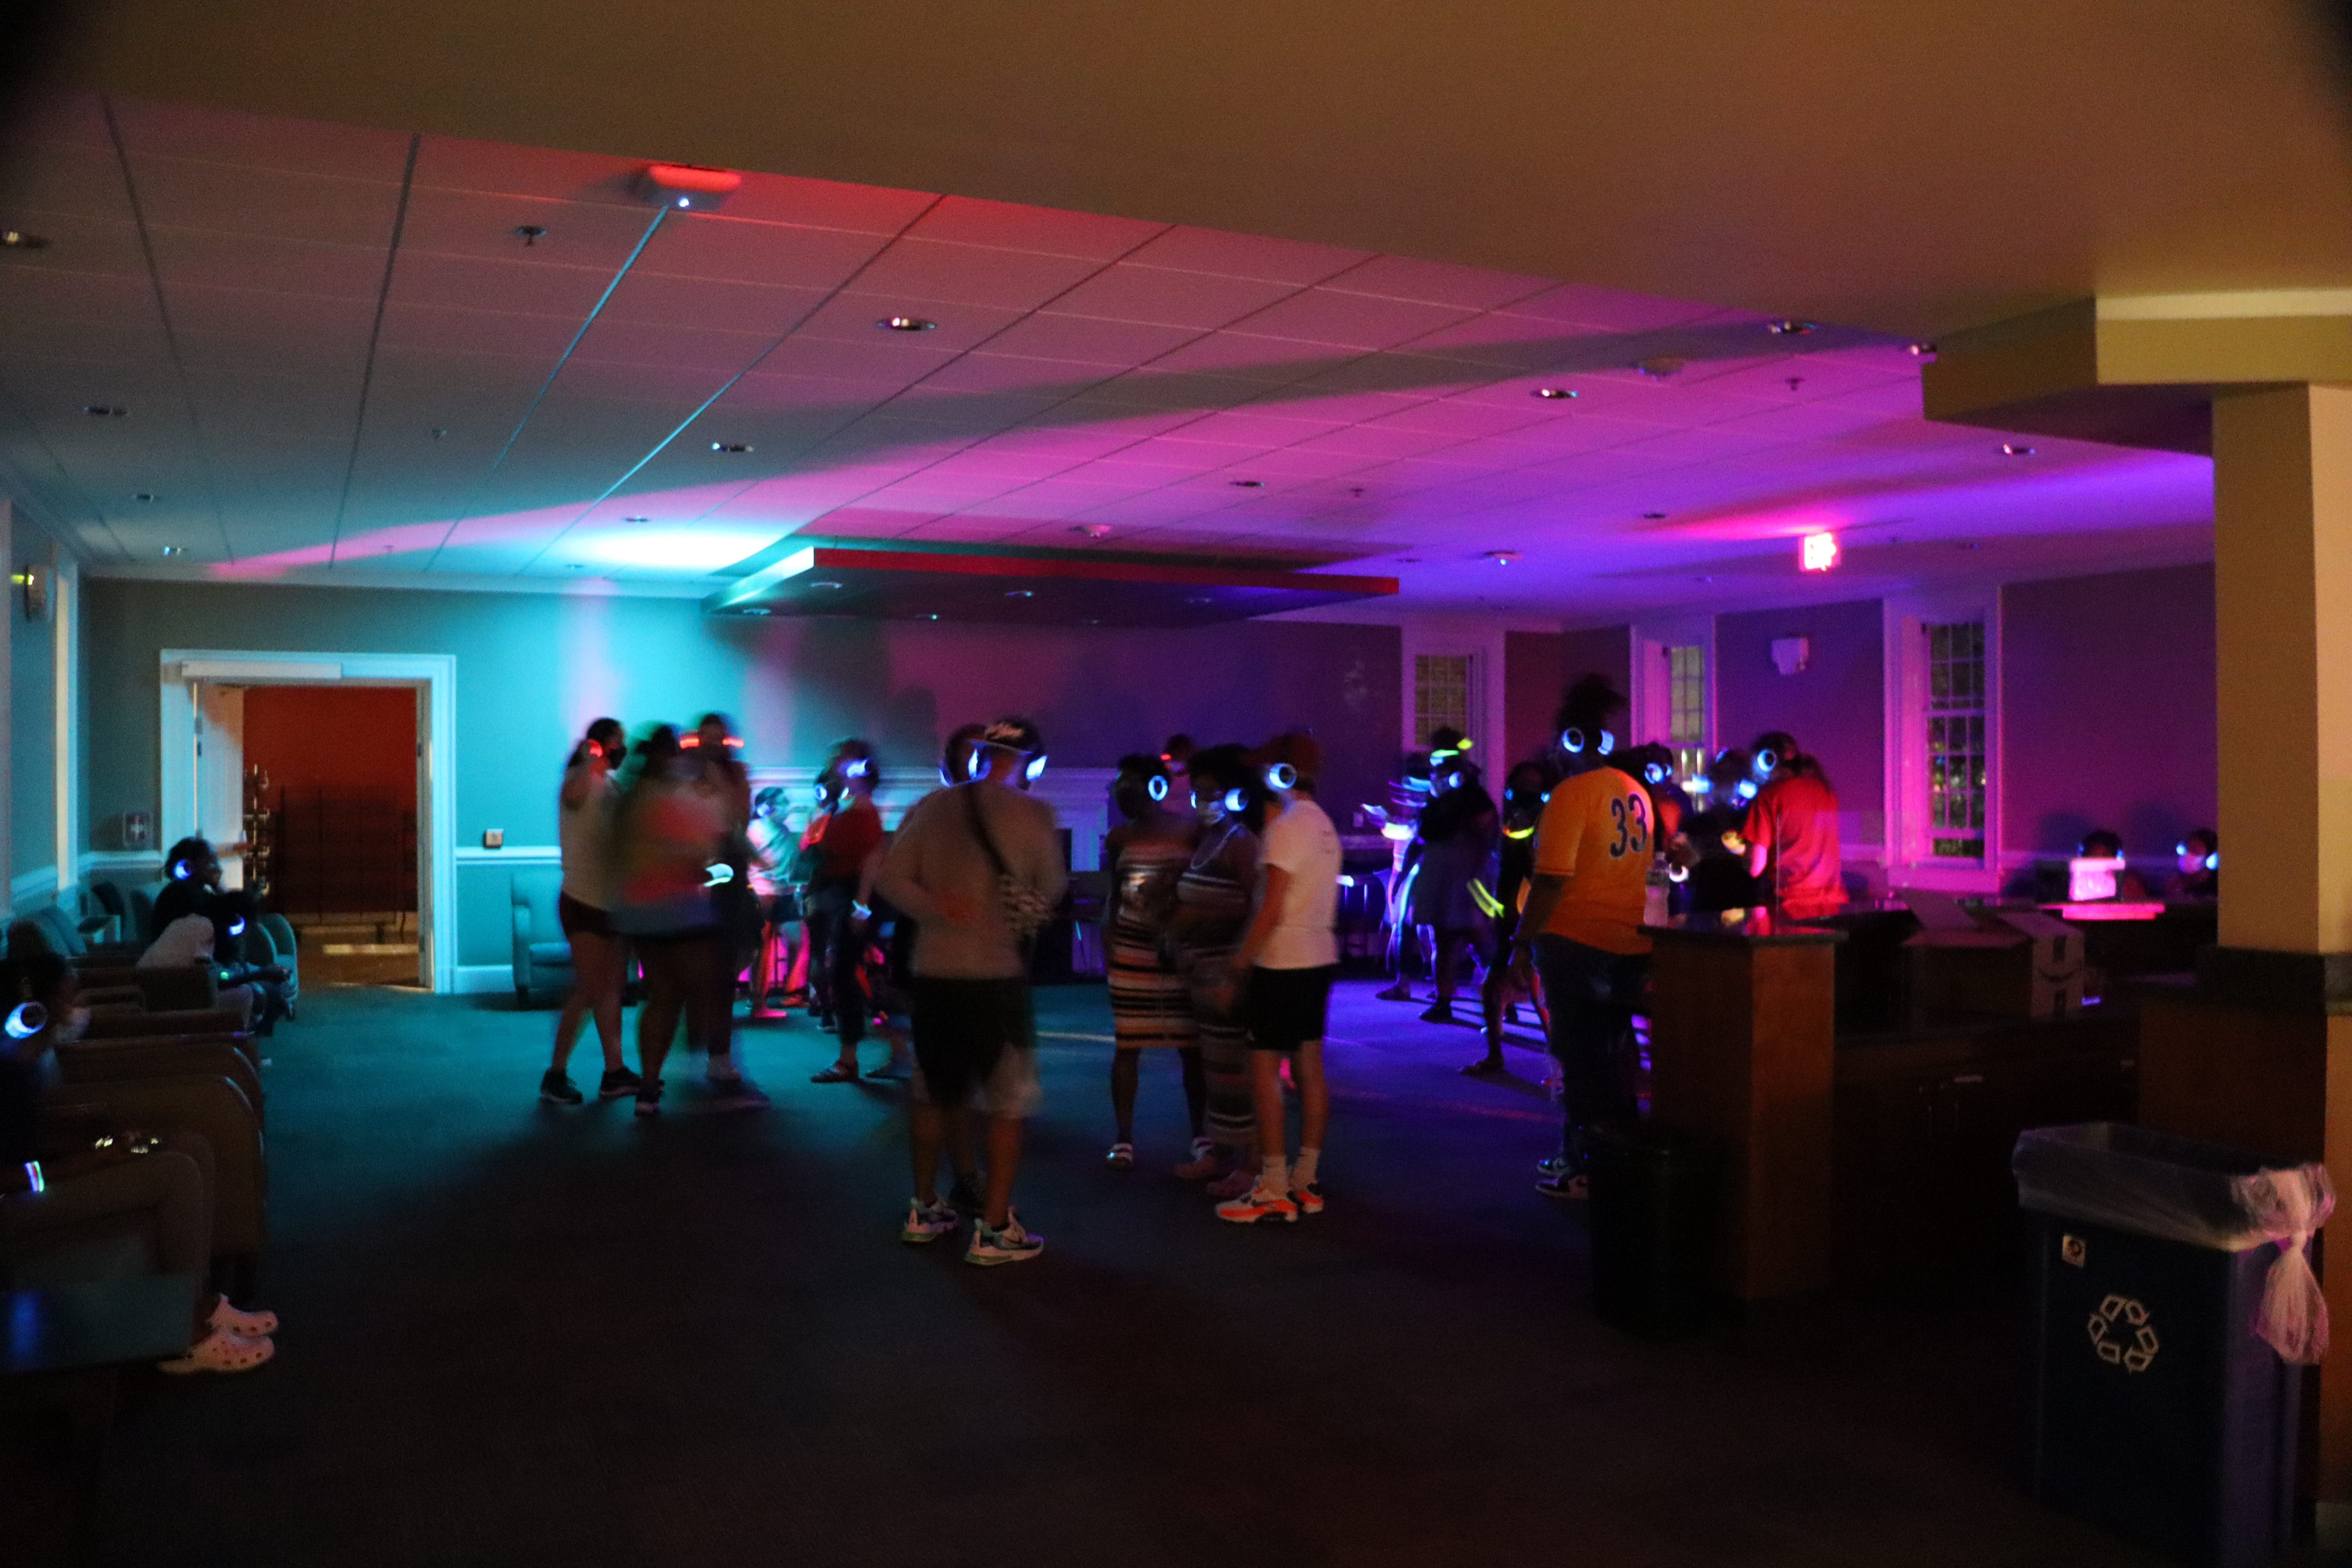 Students hang out and dance at the Silent Disco event.